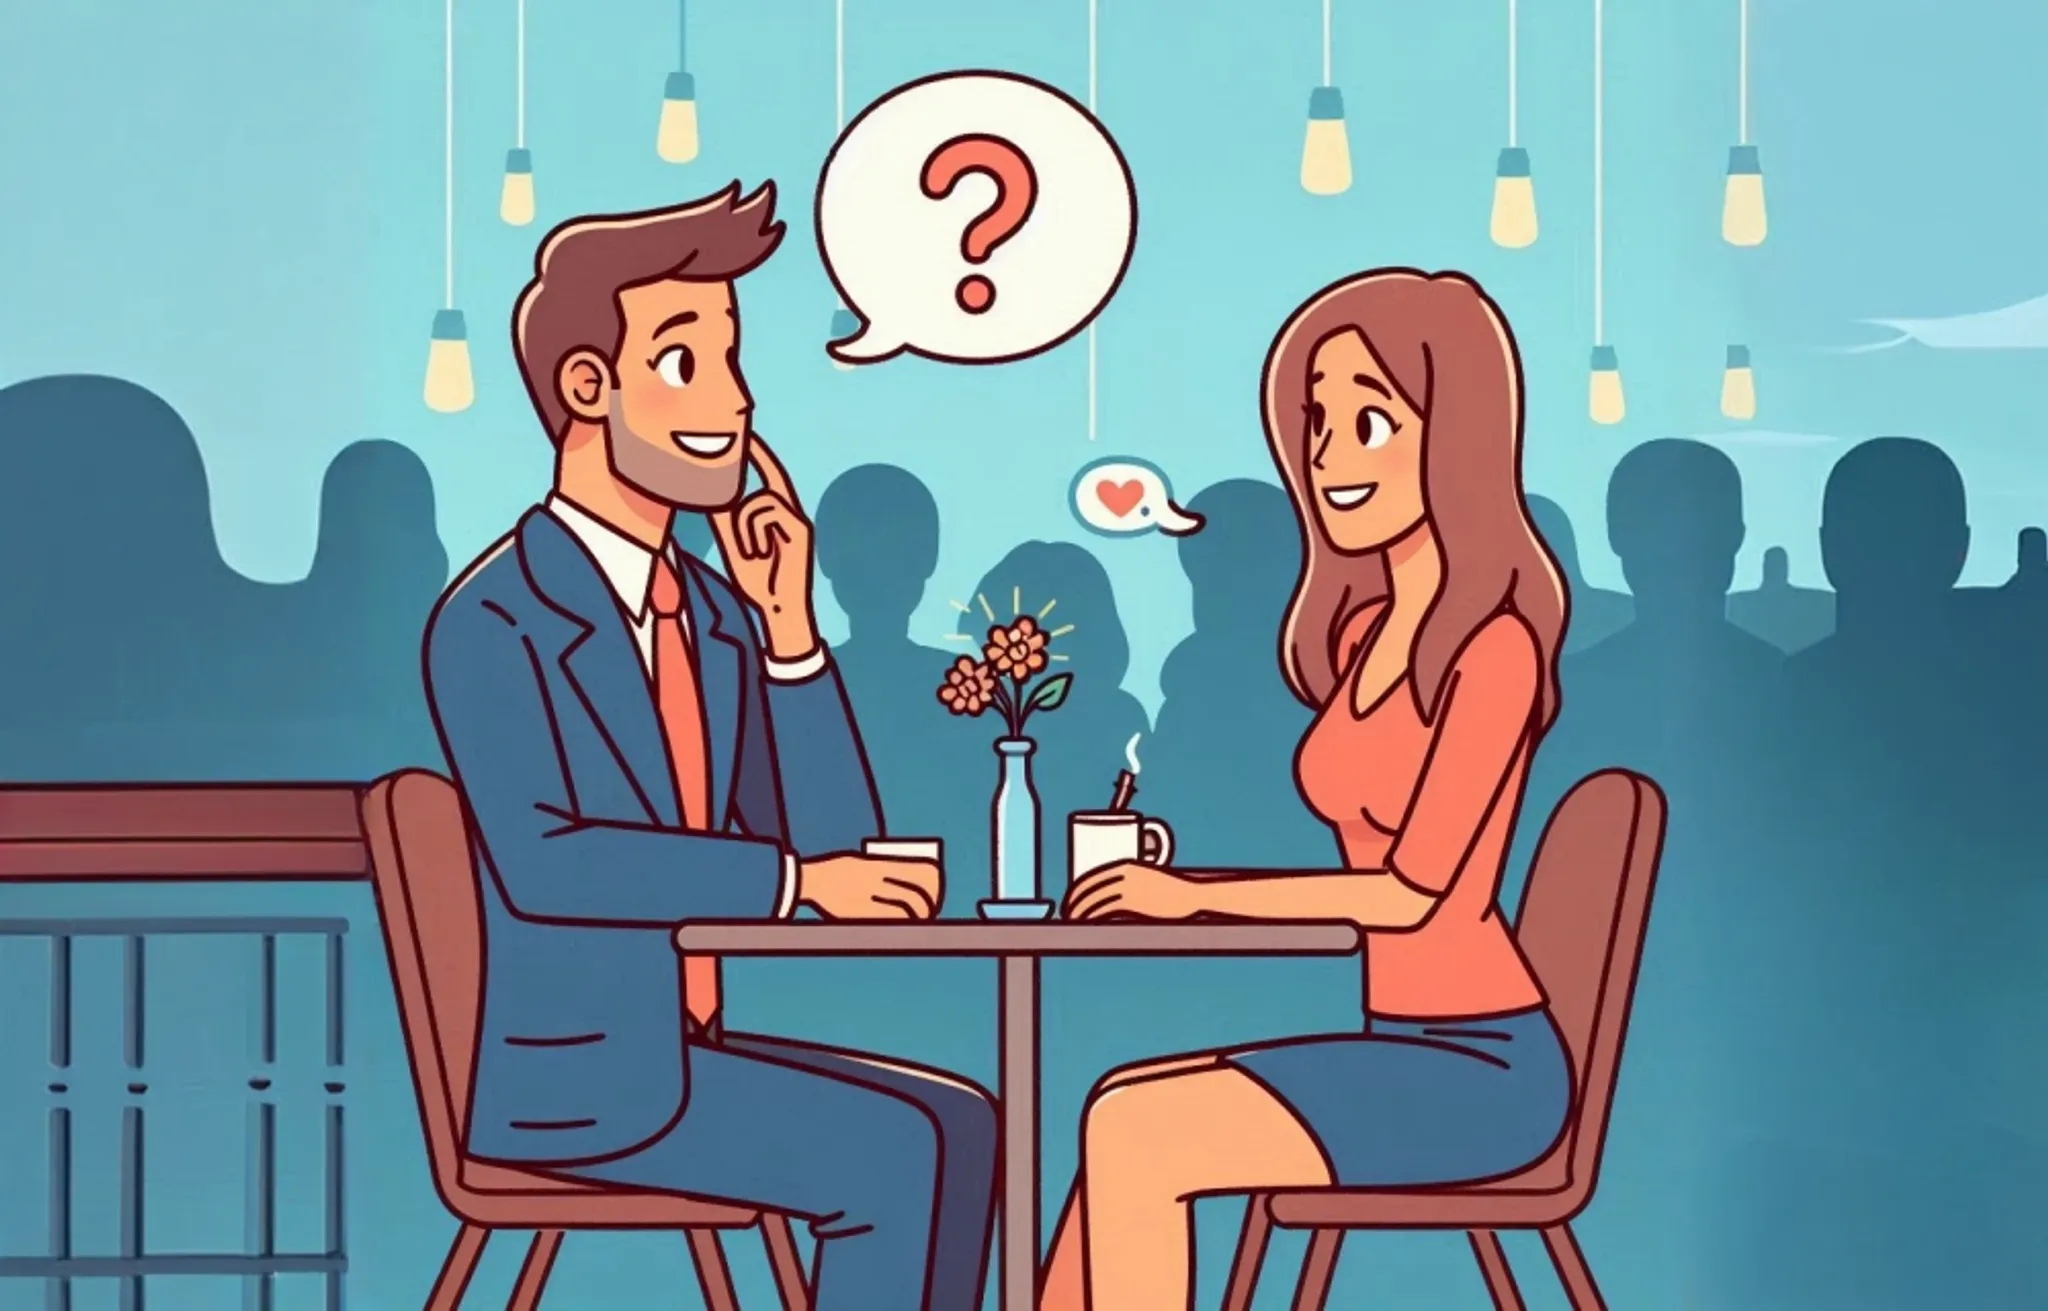 What Questions Do You Ask at Speed Dating